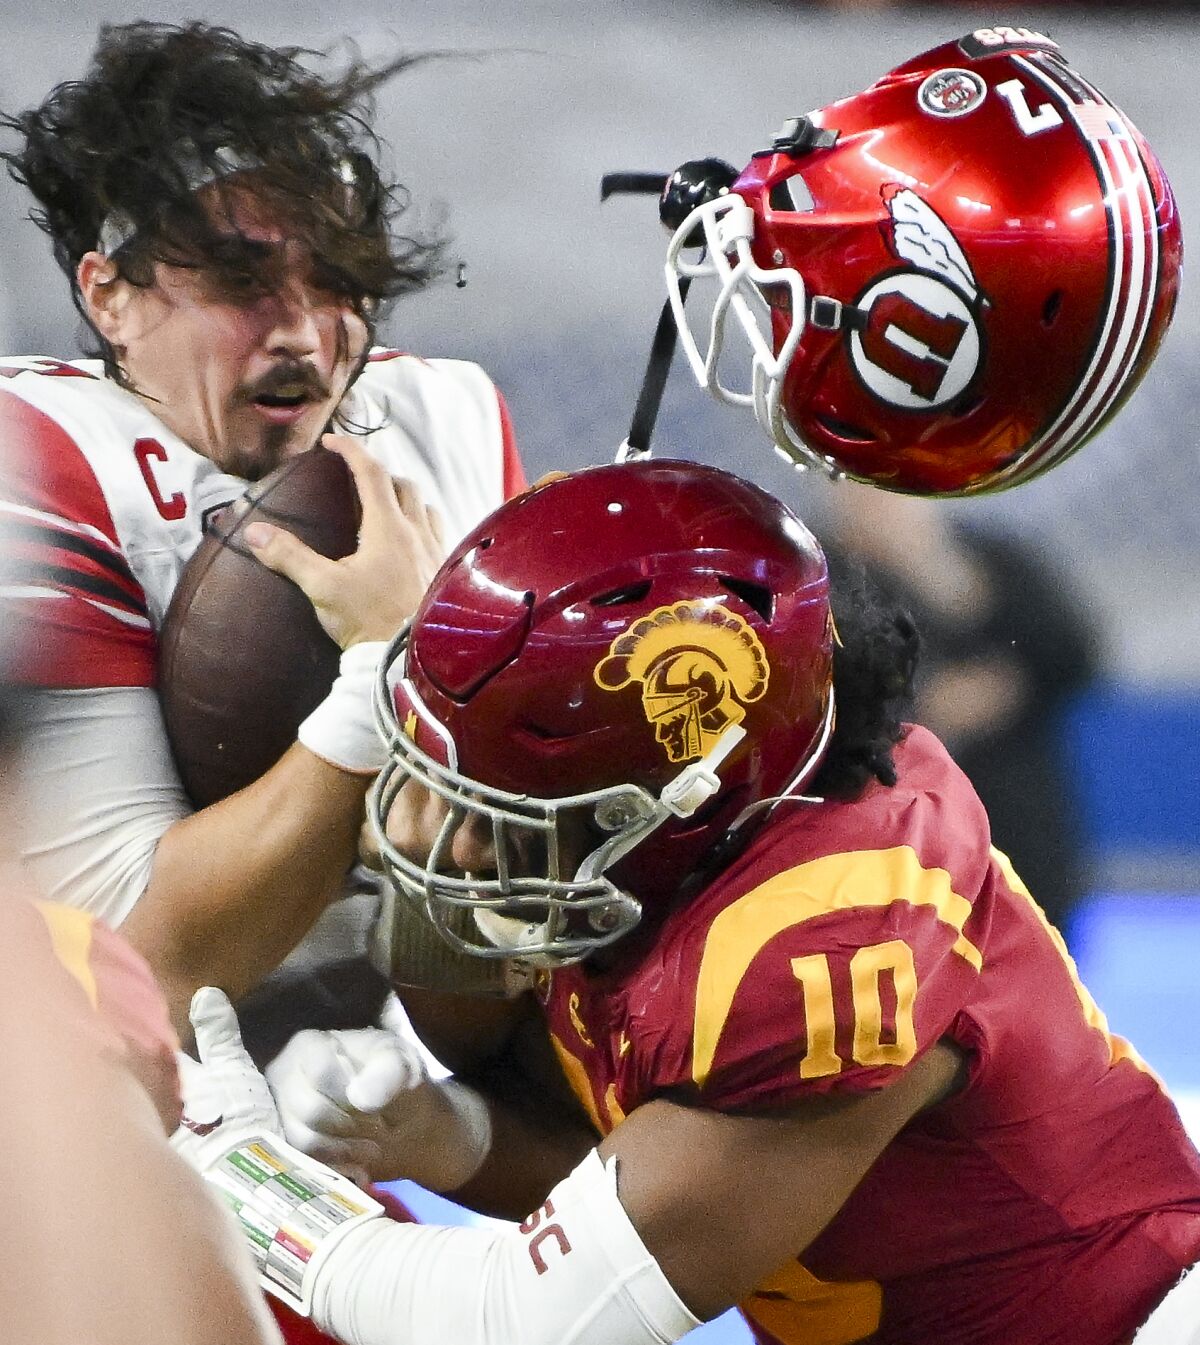 USC linebacker Ralen Goforth tackles Utah quarterback Cameron Rising, whose helmet popped off during the play